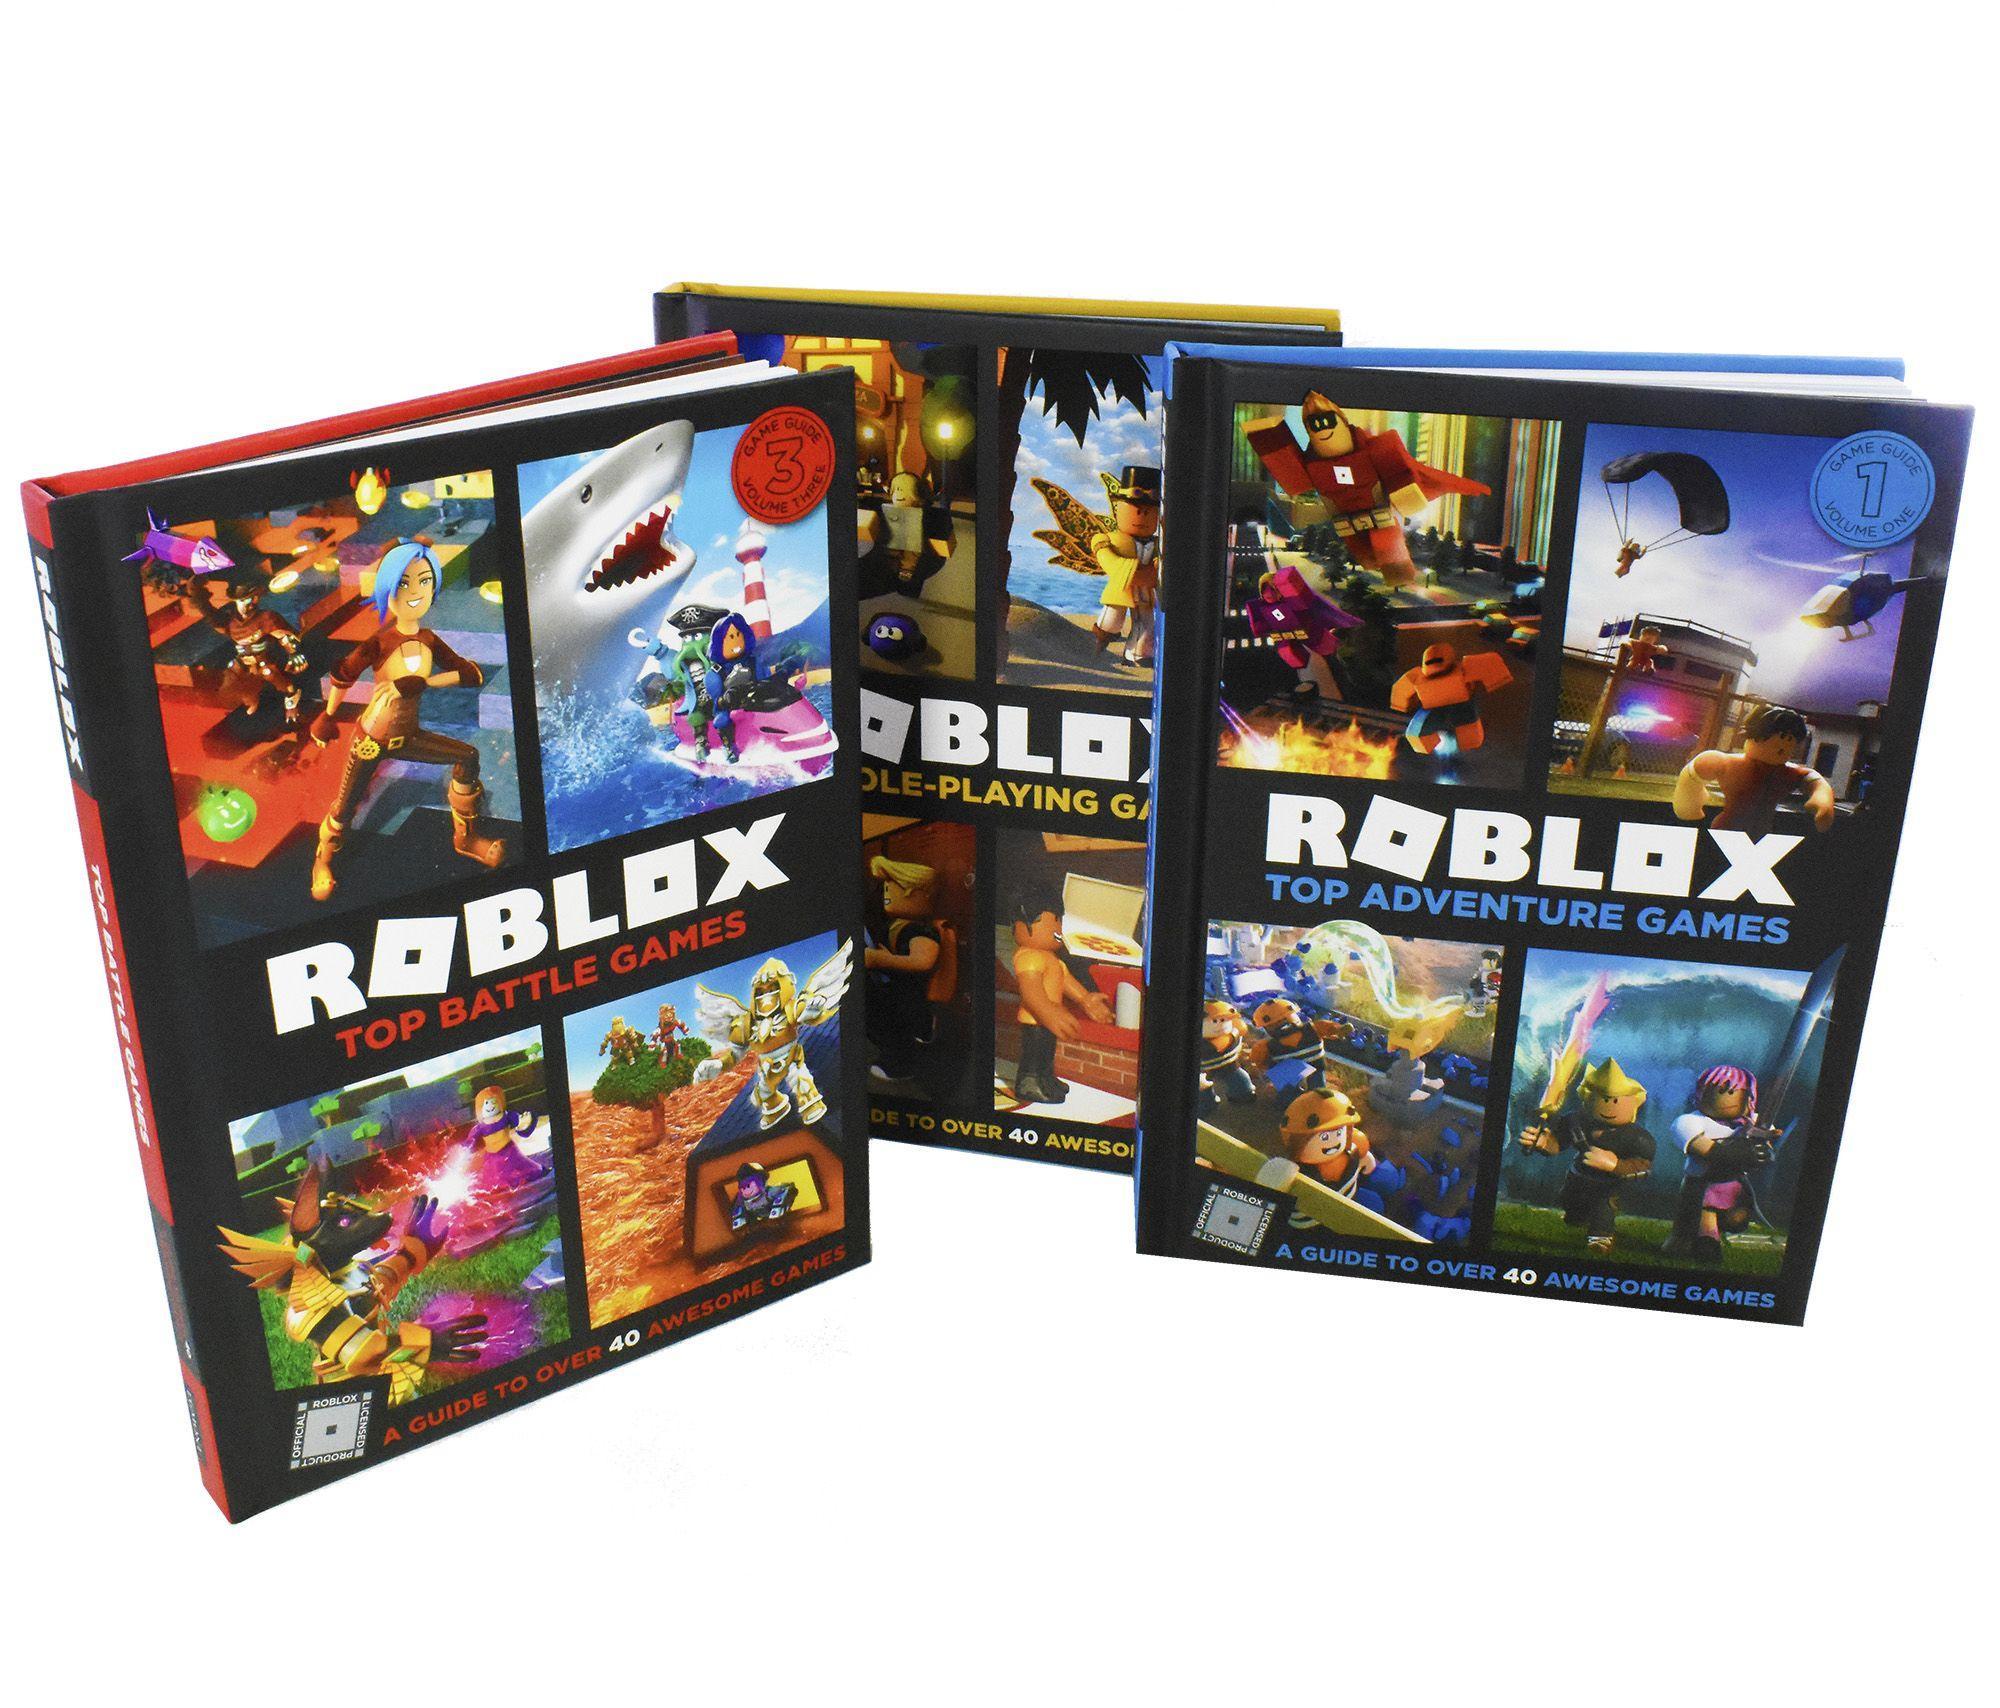 Roblox Ultimate Guide 3 Books Children Collection Hardback By David Jagneaux St Stephens Books - book case roblox